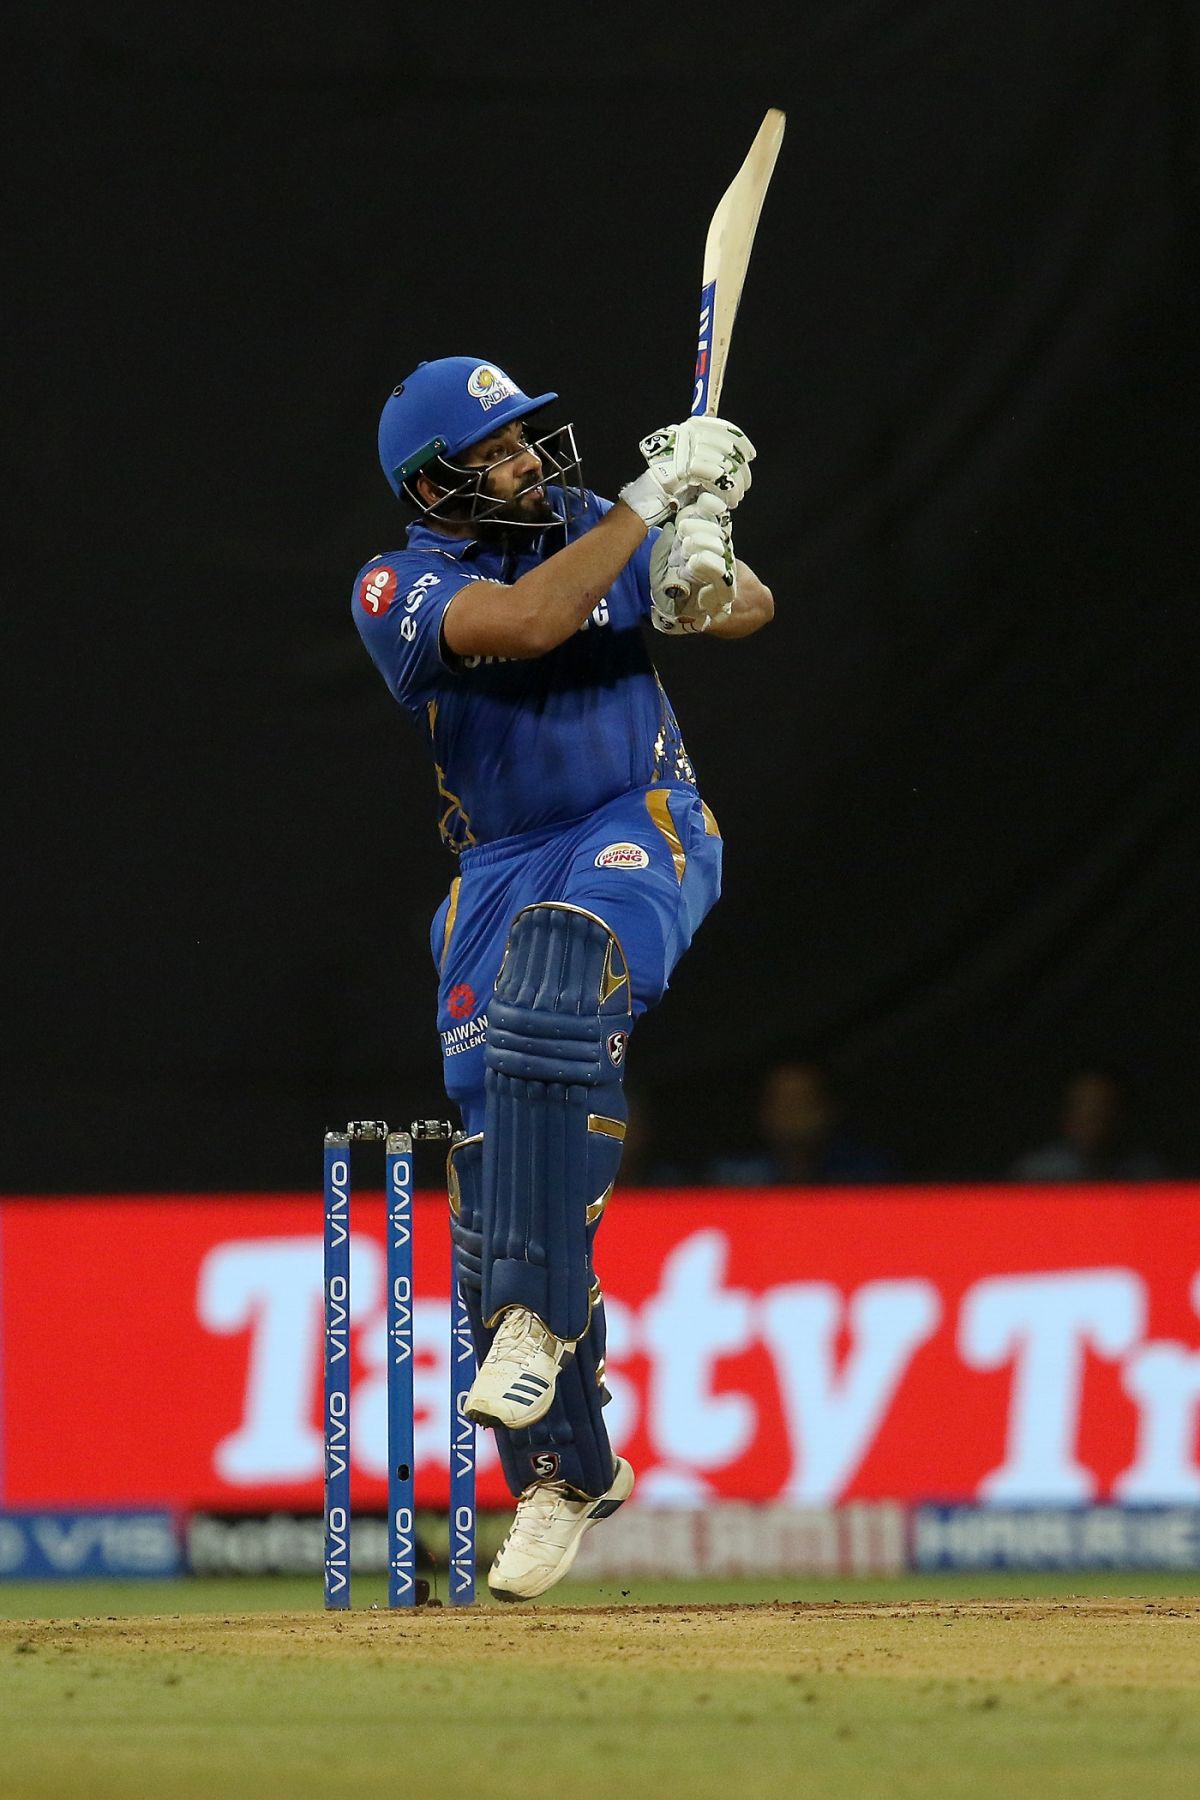 Rohit Sharma swivels to pull the ball powerfully ESPNcricinfo